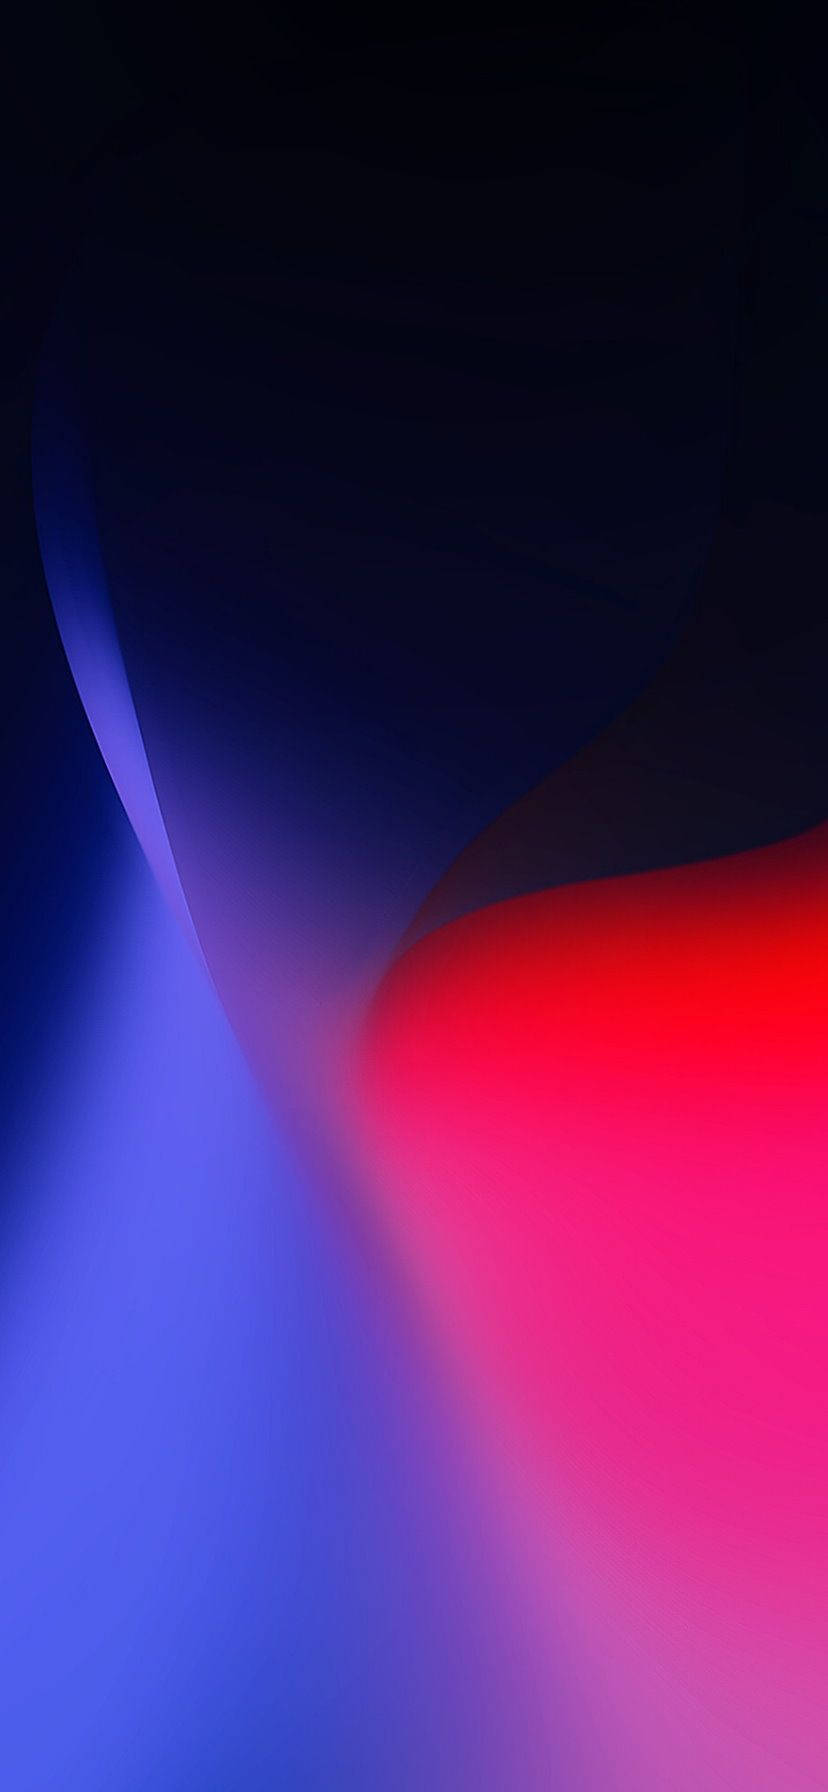 Iphone Xr Blue Red Coiled Background